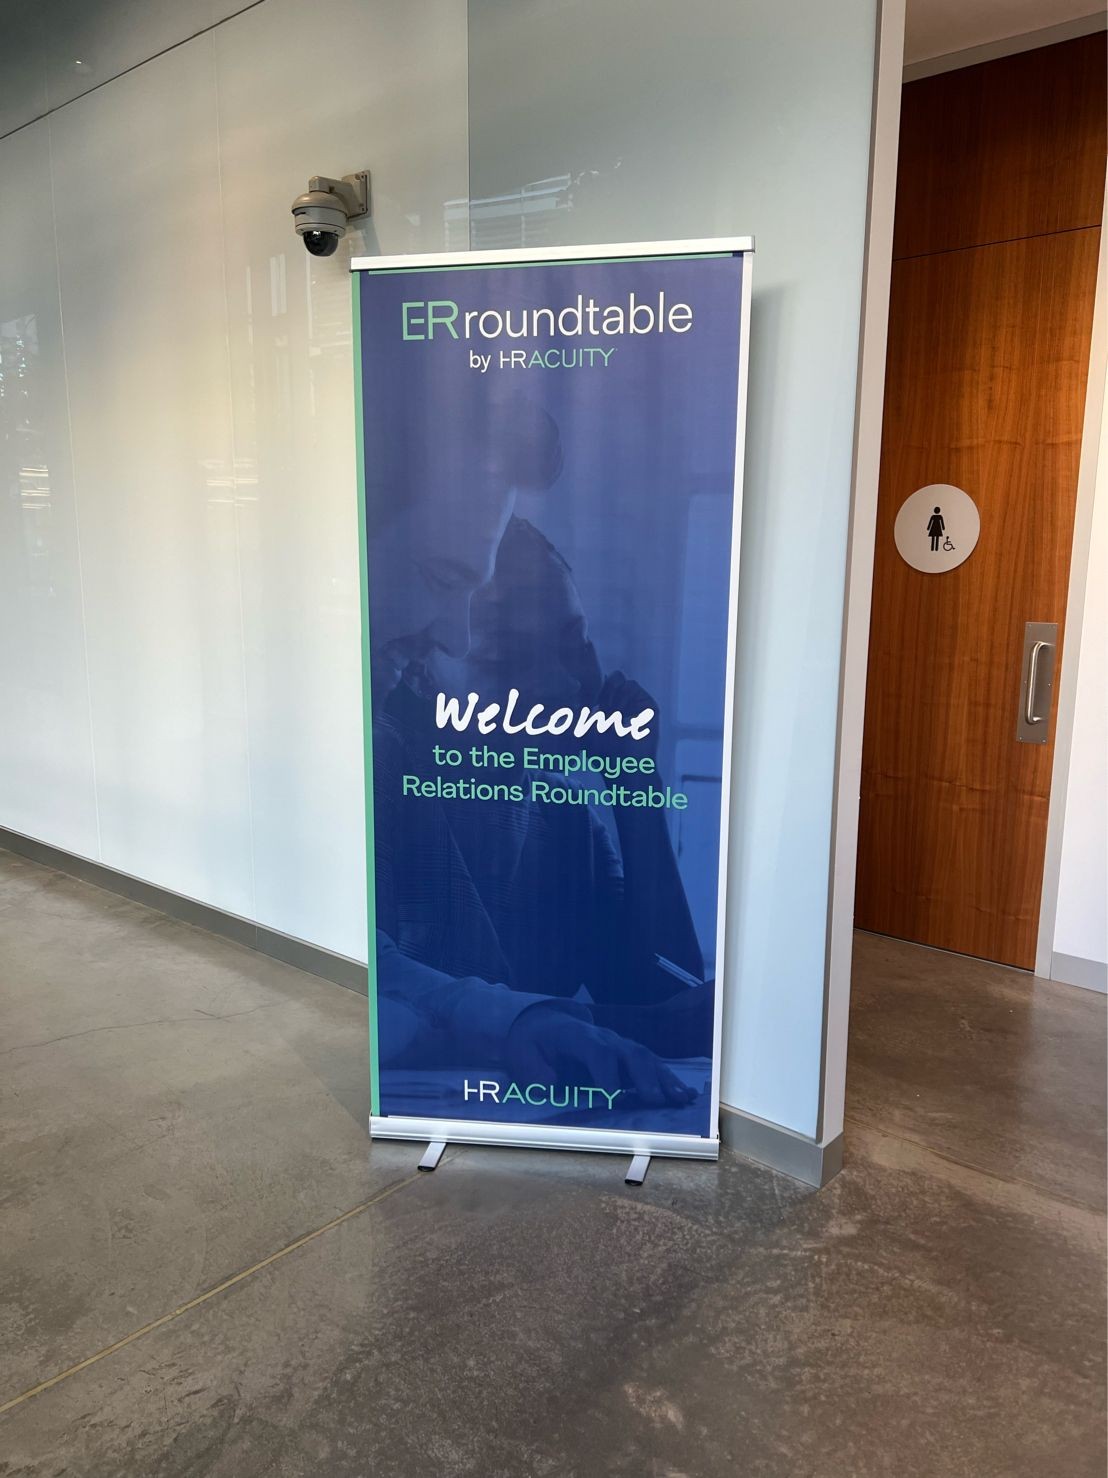 HR Acuity hosts an annual Roundtable Event for members of the empowER community to collaborate and learn from experts.